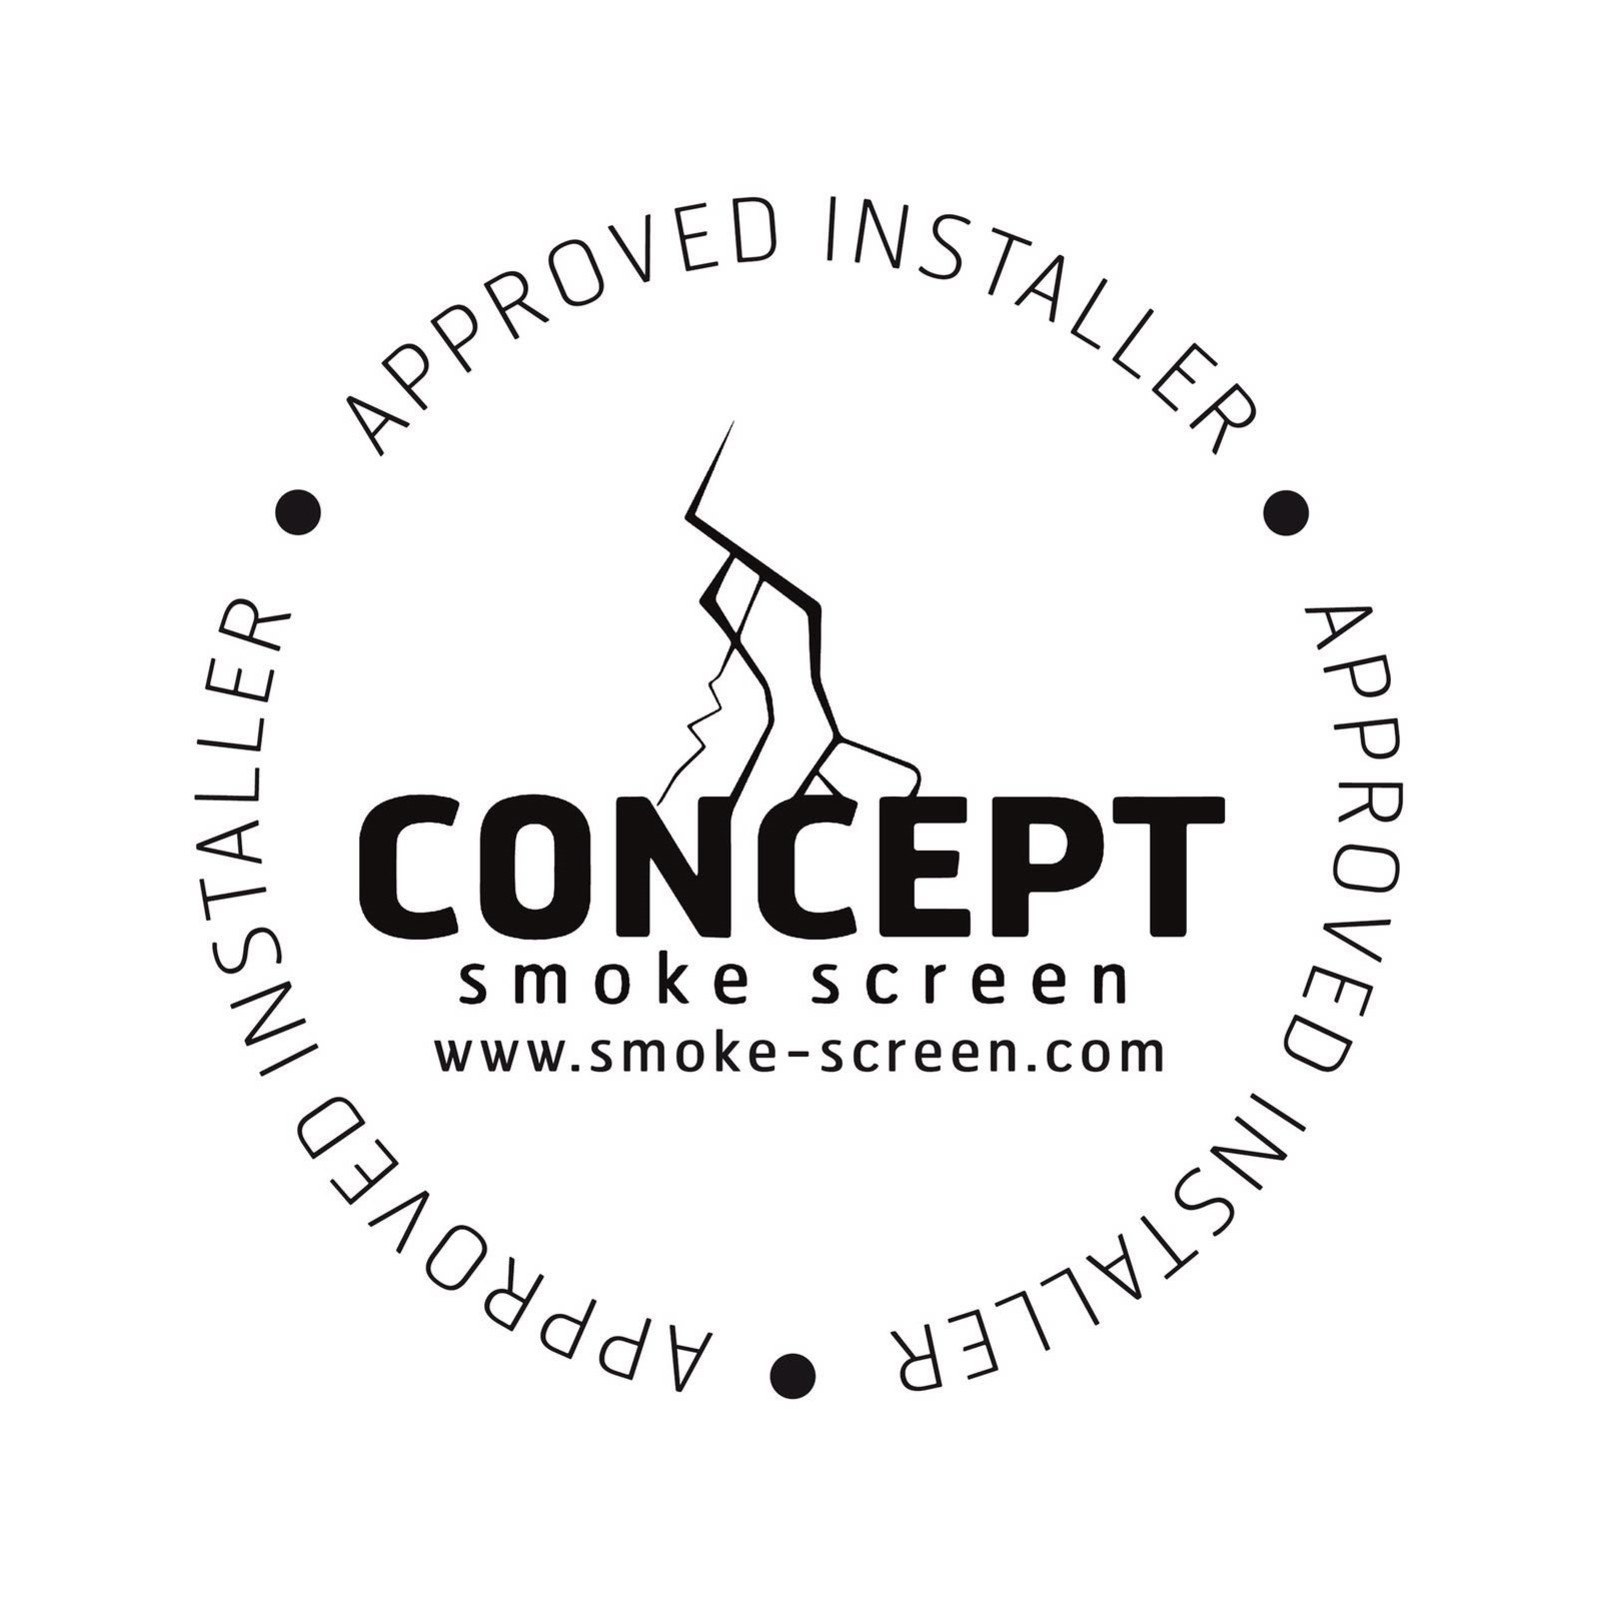 approved installer of concept smoke screen